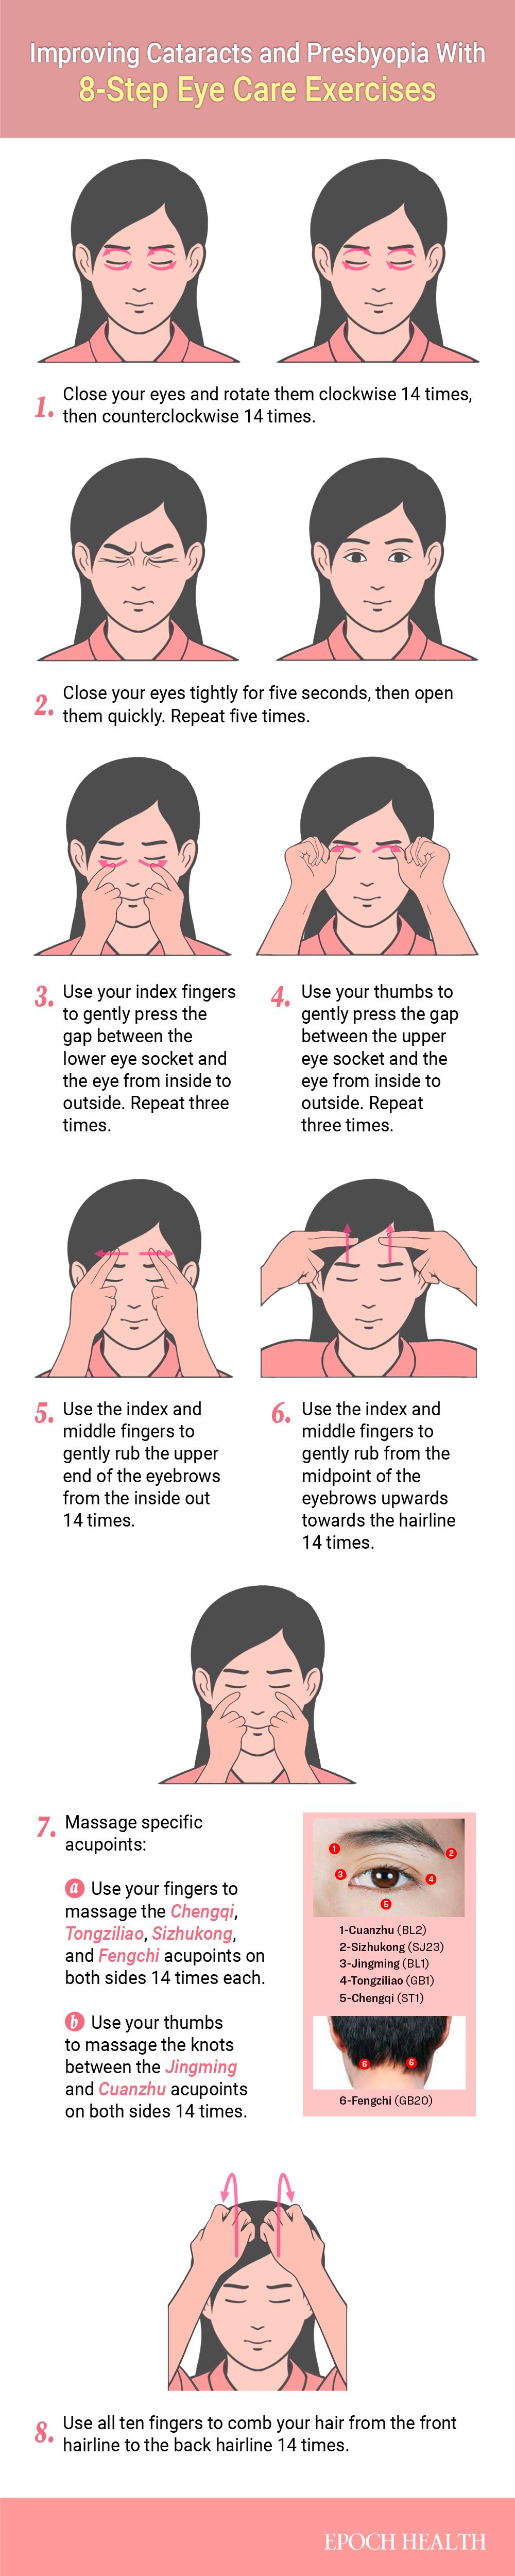 Eye exercises. (The Epoch Times)